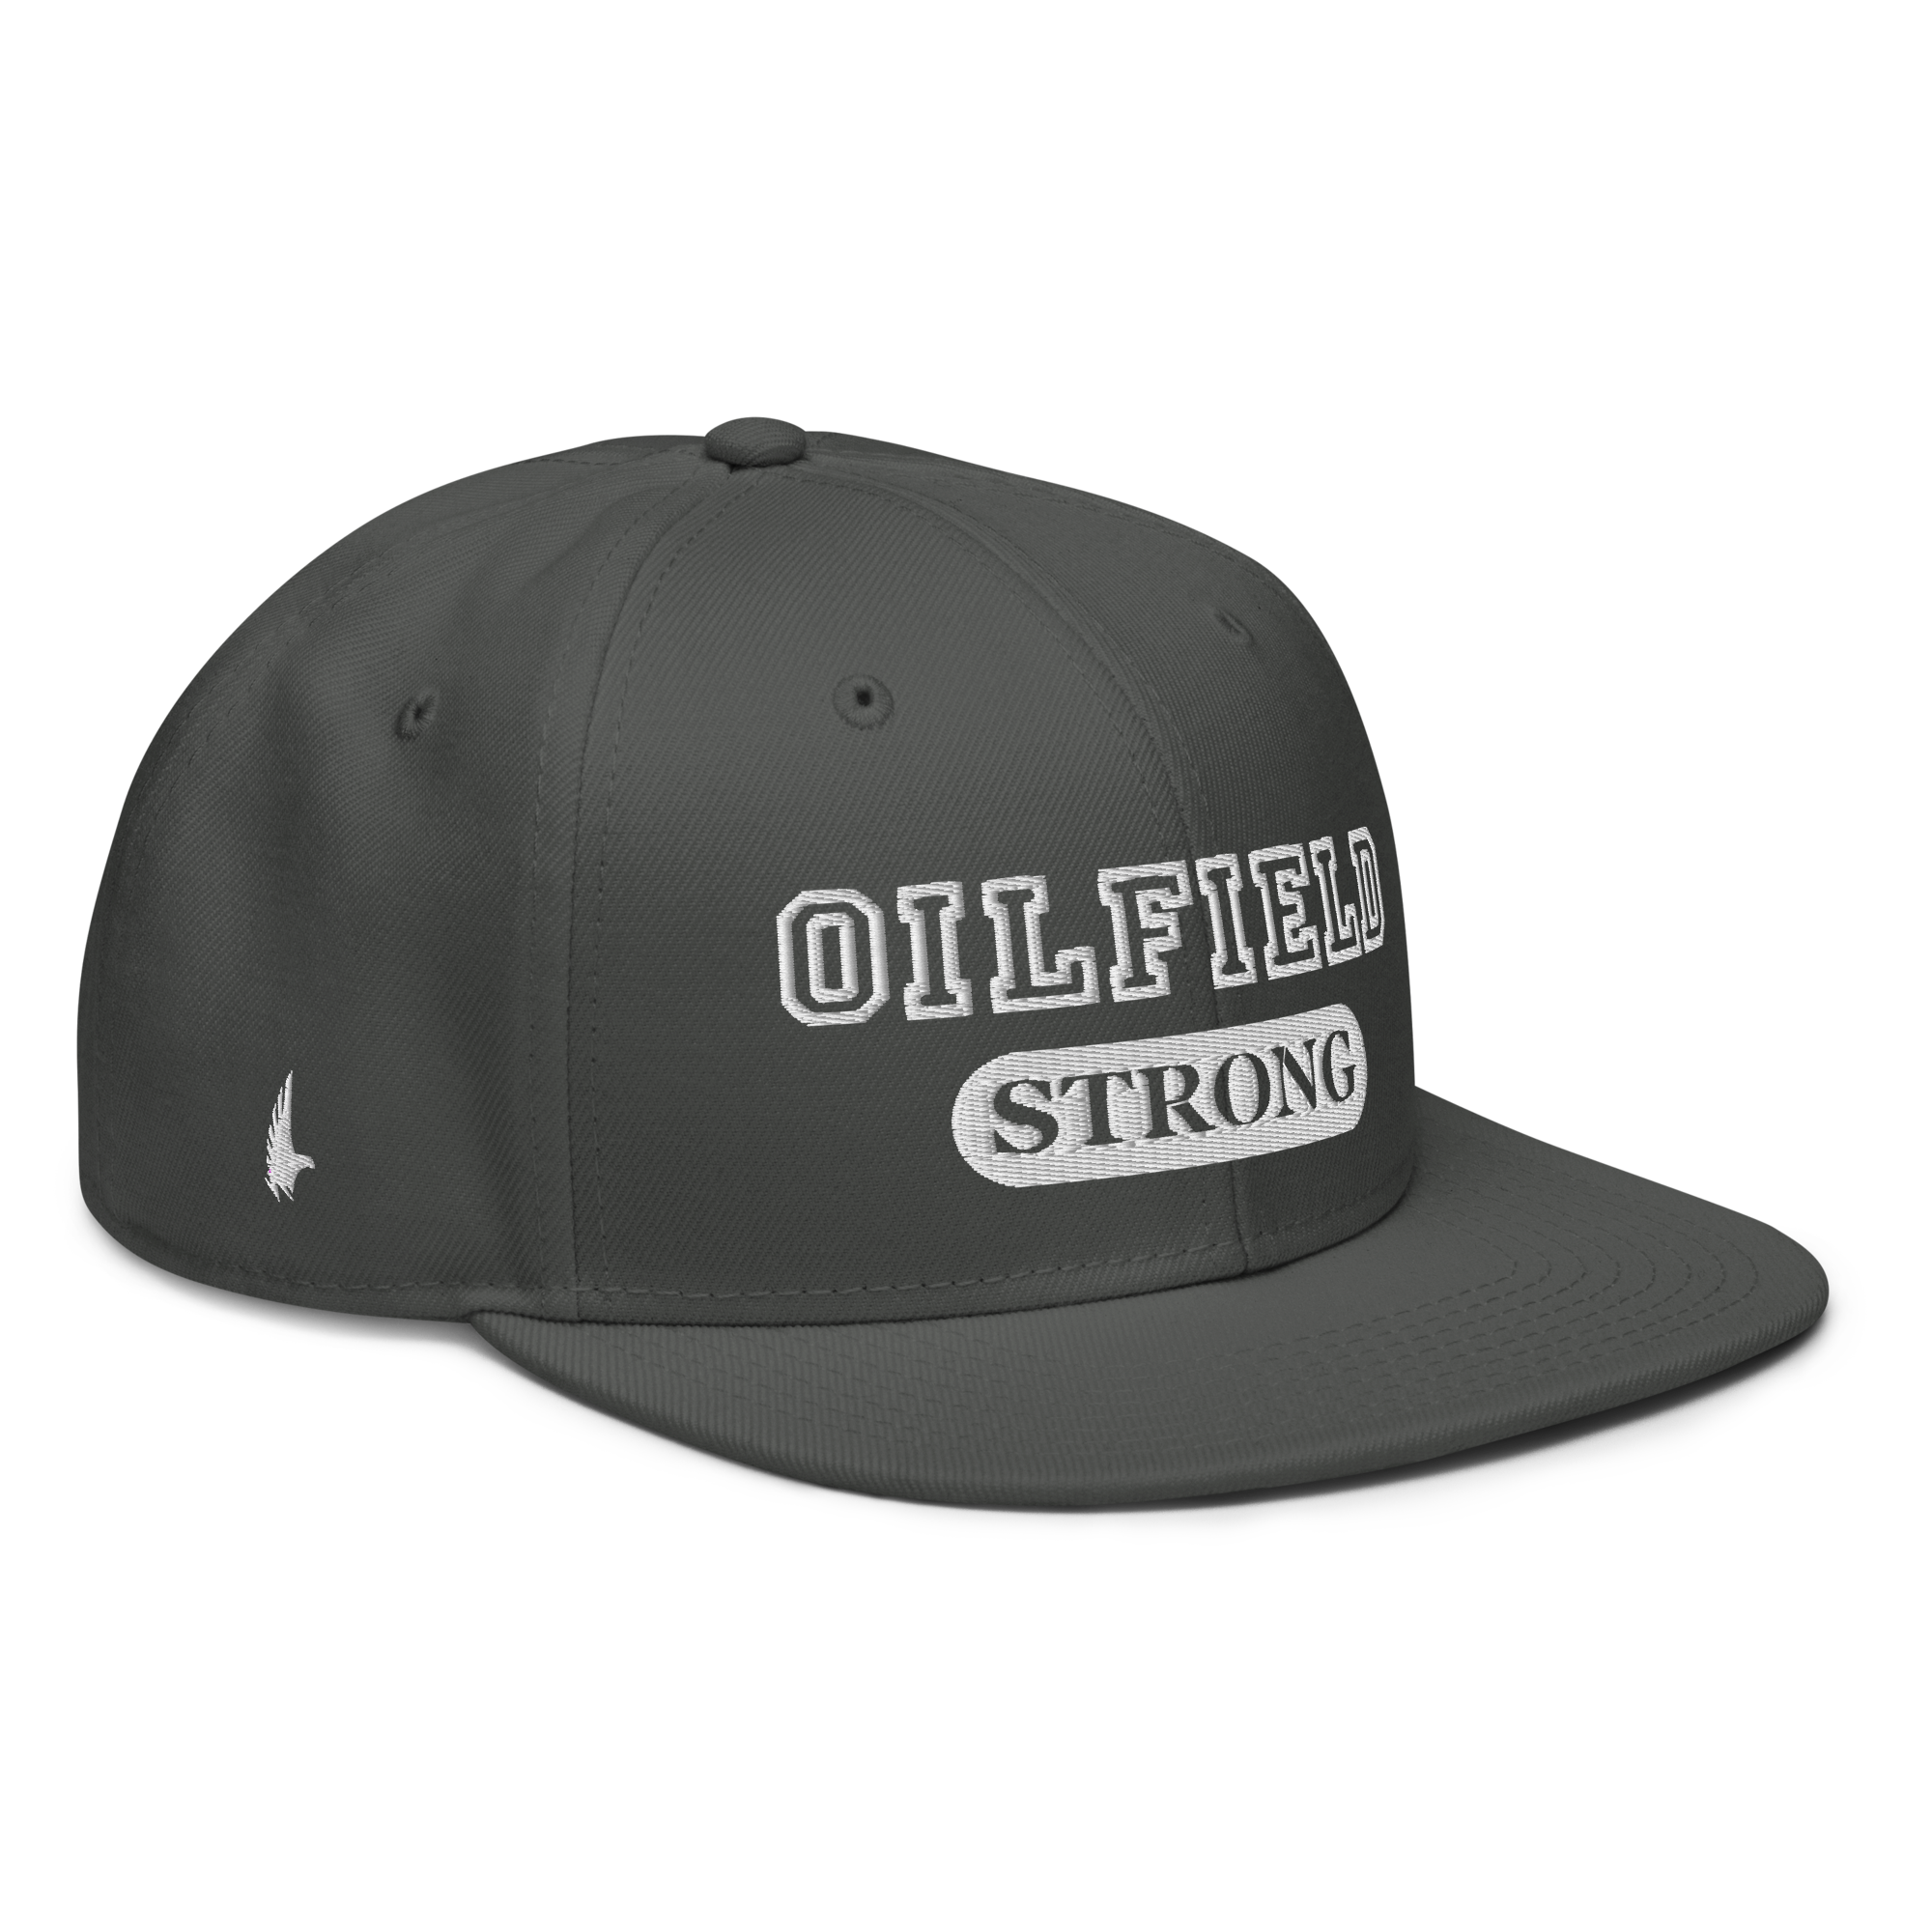 Oilfield Strong Snapback Hat - Charcoal Grey - Loyalty Vibes